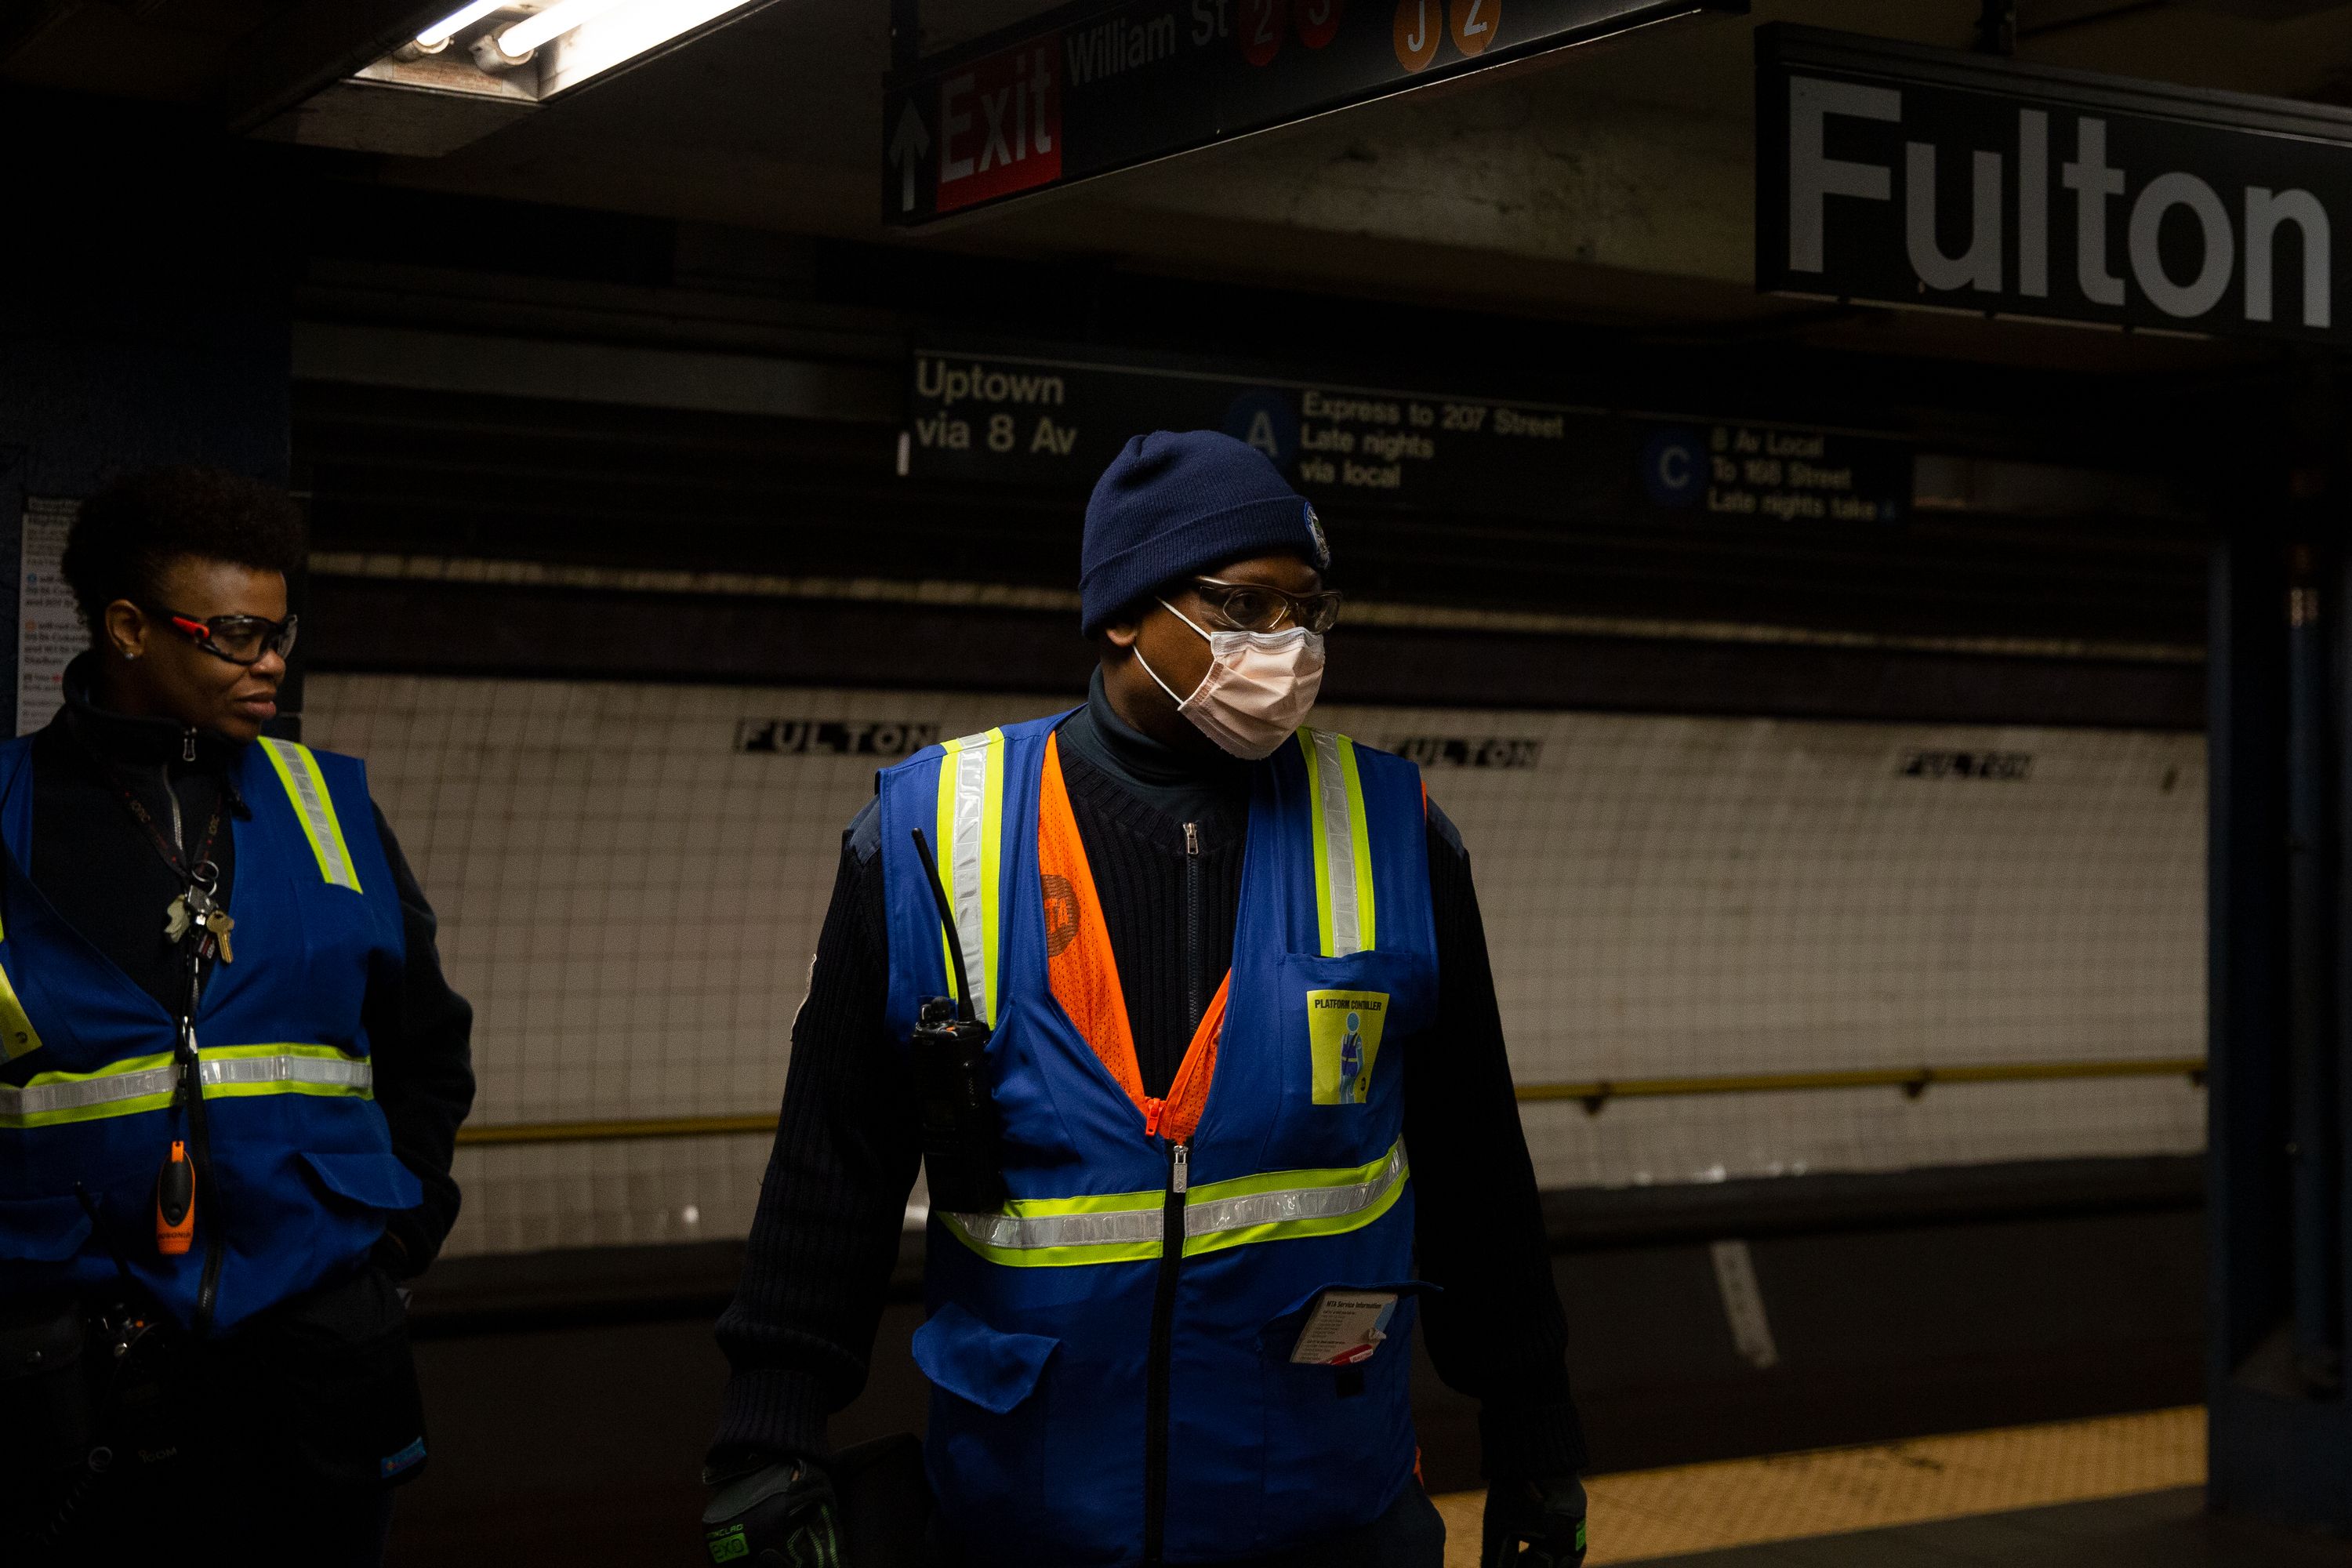 An MTA worker wears a surgical mask on the Fulton Street A/C platform.